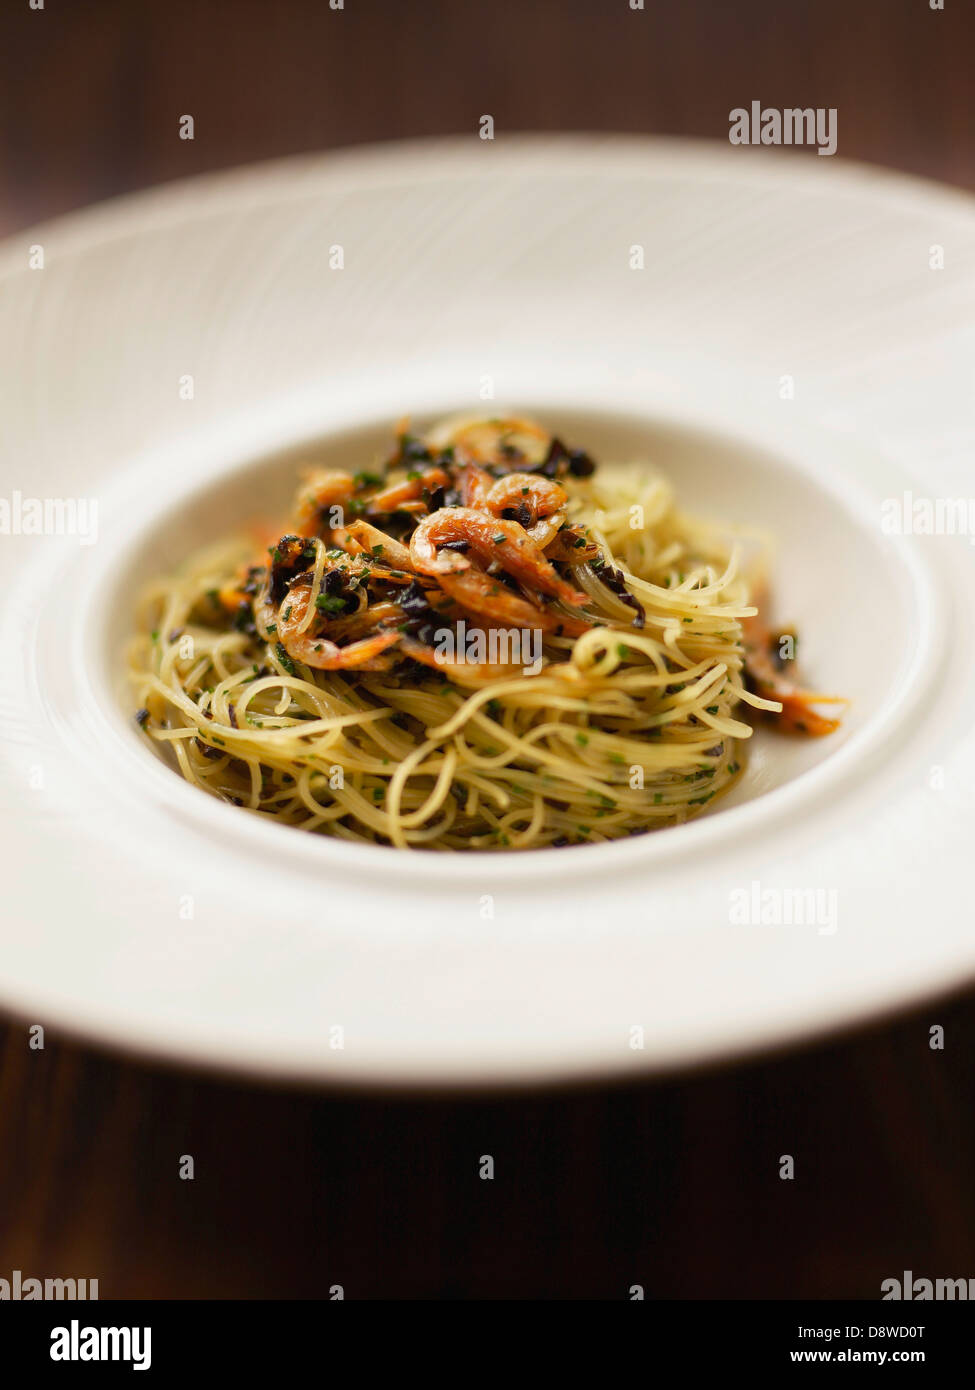 Italian-style chinese noodles with shrimps Stock Photo